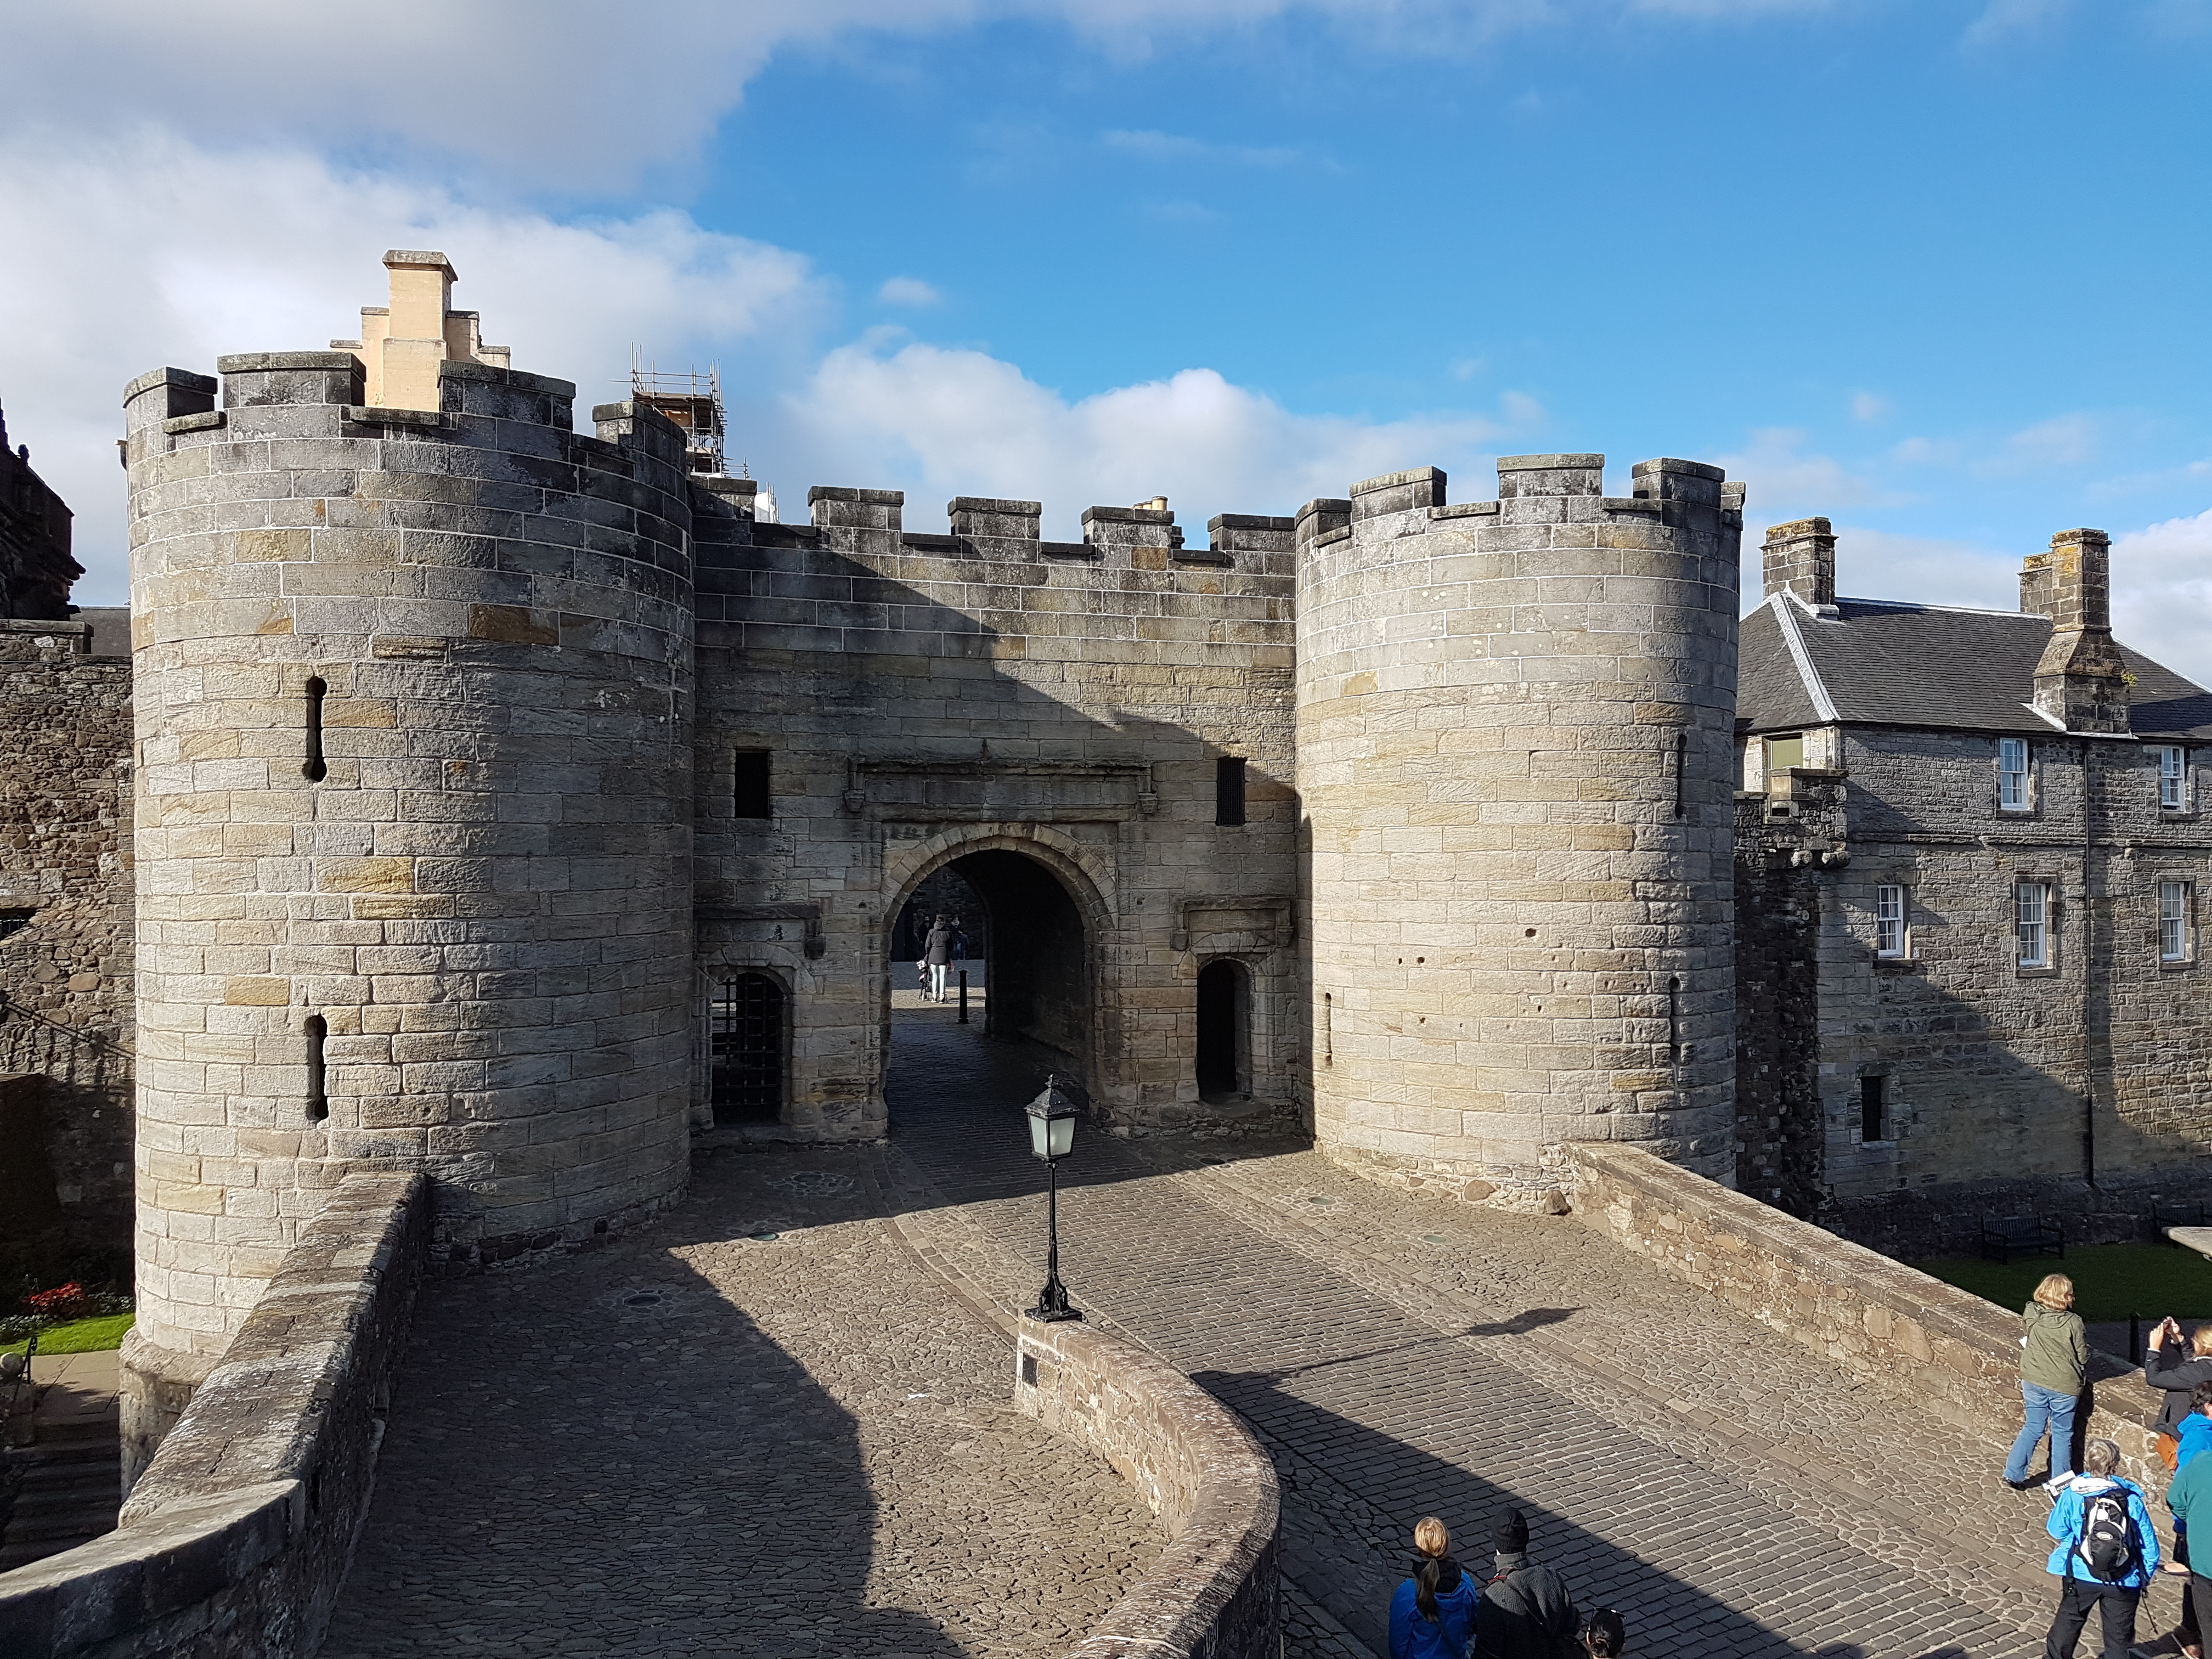 The beautiful Stirling castle